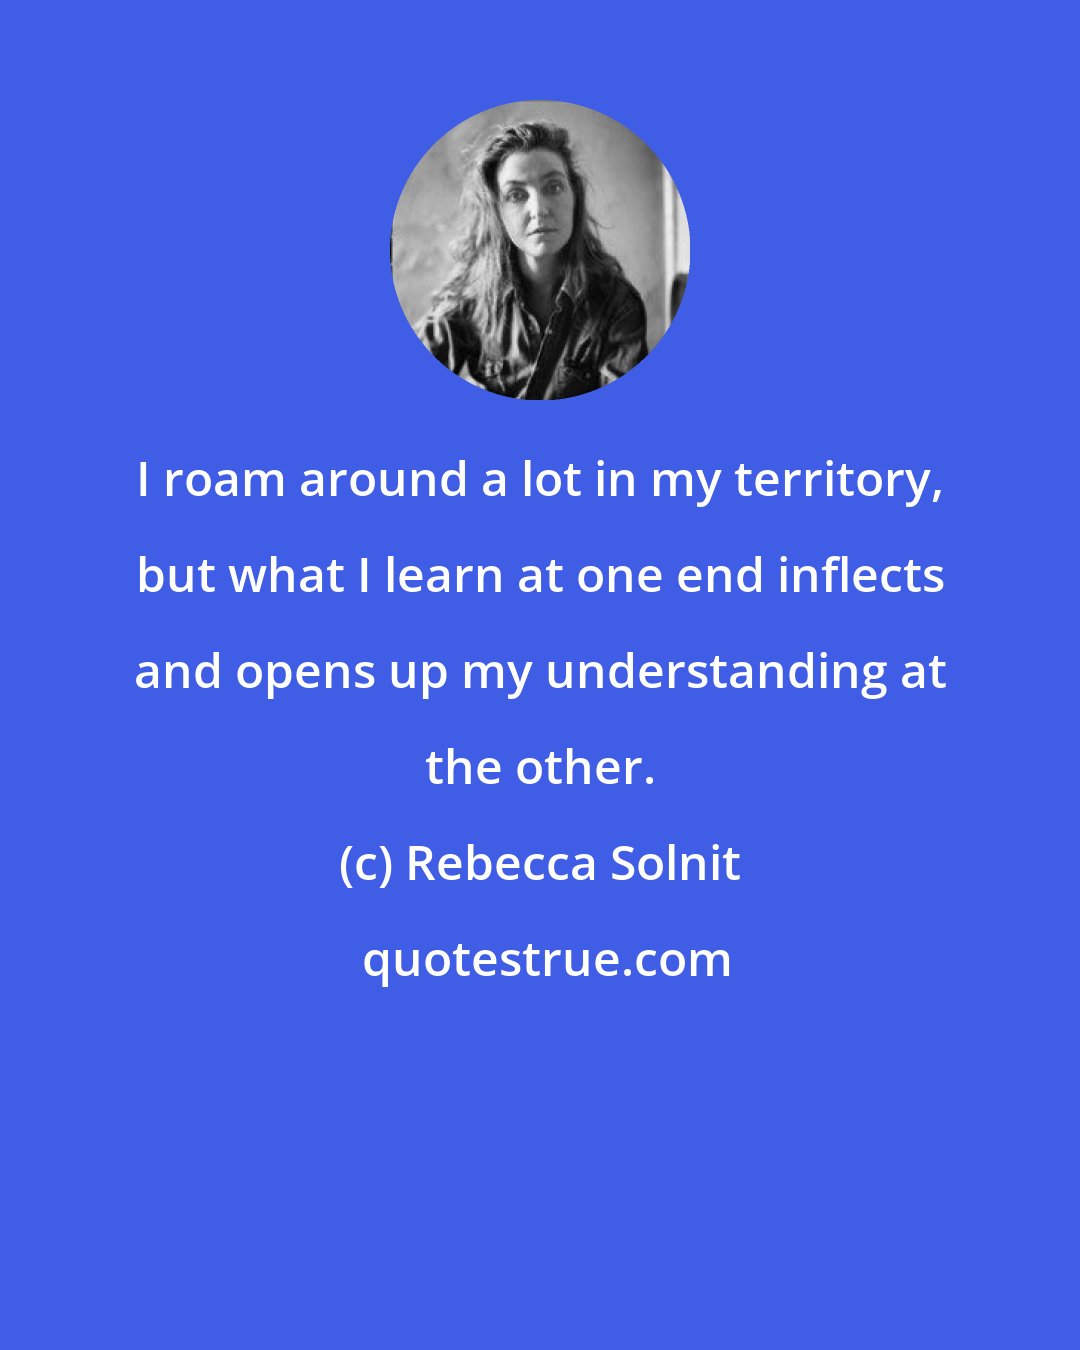 Rebecca Solnit: I roam around a lot in my territory, but what I learn at one end inflects and opens up my understanding at the other.